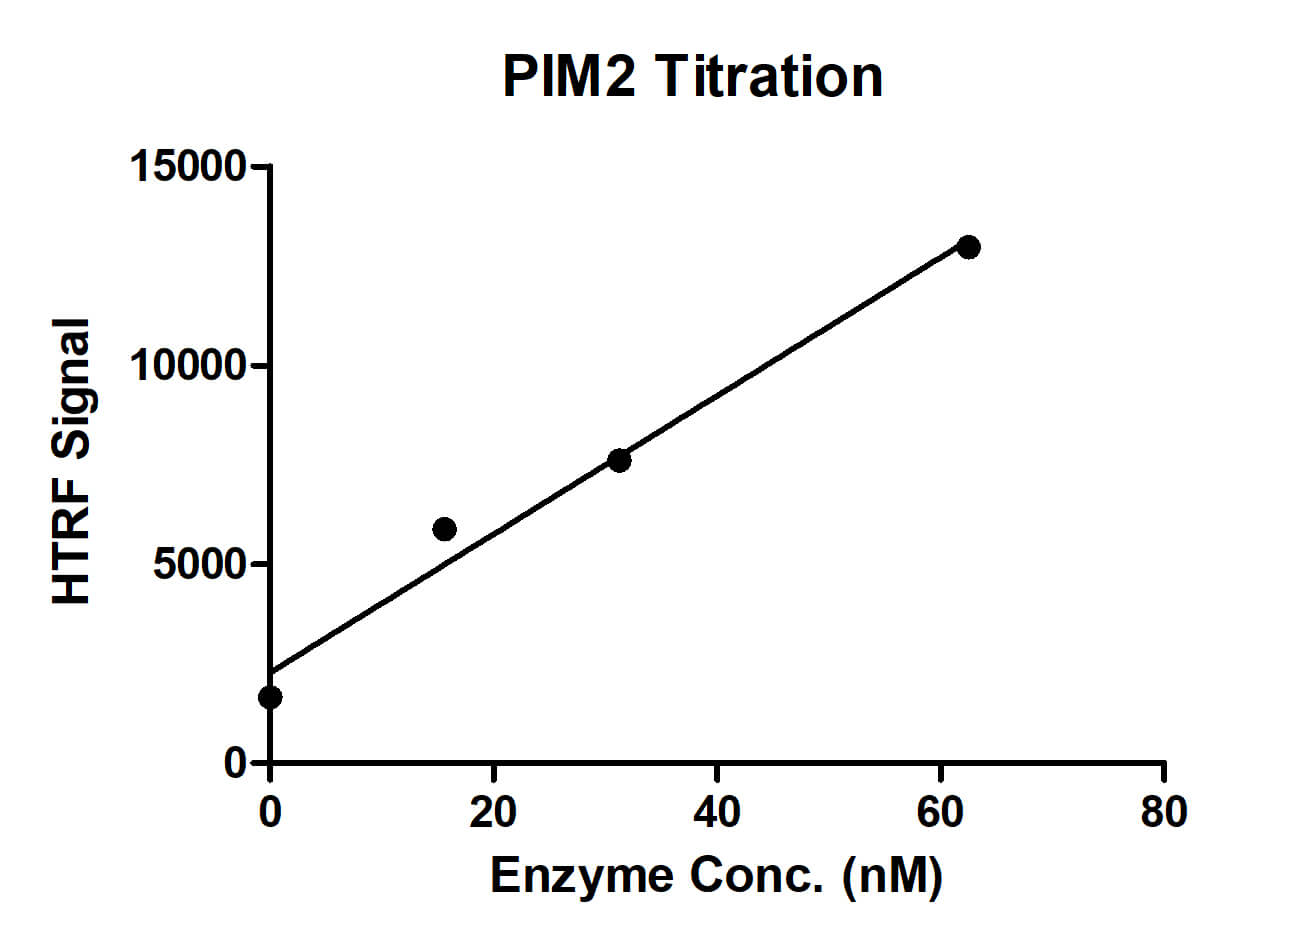 HTRF assay for PIM2 activity 1 uM STK S3 substrate was incubated with different concentrations of PIM2 protein in a 10 ul reaction system containing 1×Enzymatic Buffer, 5 mM MgCl2, 1 mM DTT and 100 uM ATP for 1 hour. The 10 ul detection reagents containing STK antibody (1:2) and SA-XL665 (1:100) diluted with 1× Detection Buffer were added and incubated with the reactions for 30 min. All the operations and reactions were performed at room temperature. HTRF assay was used for detection.